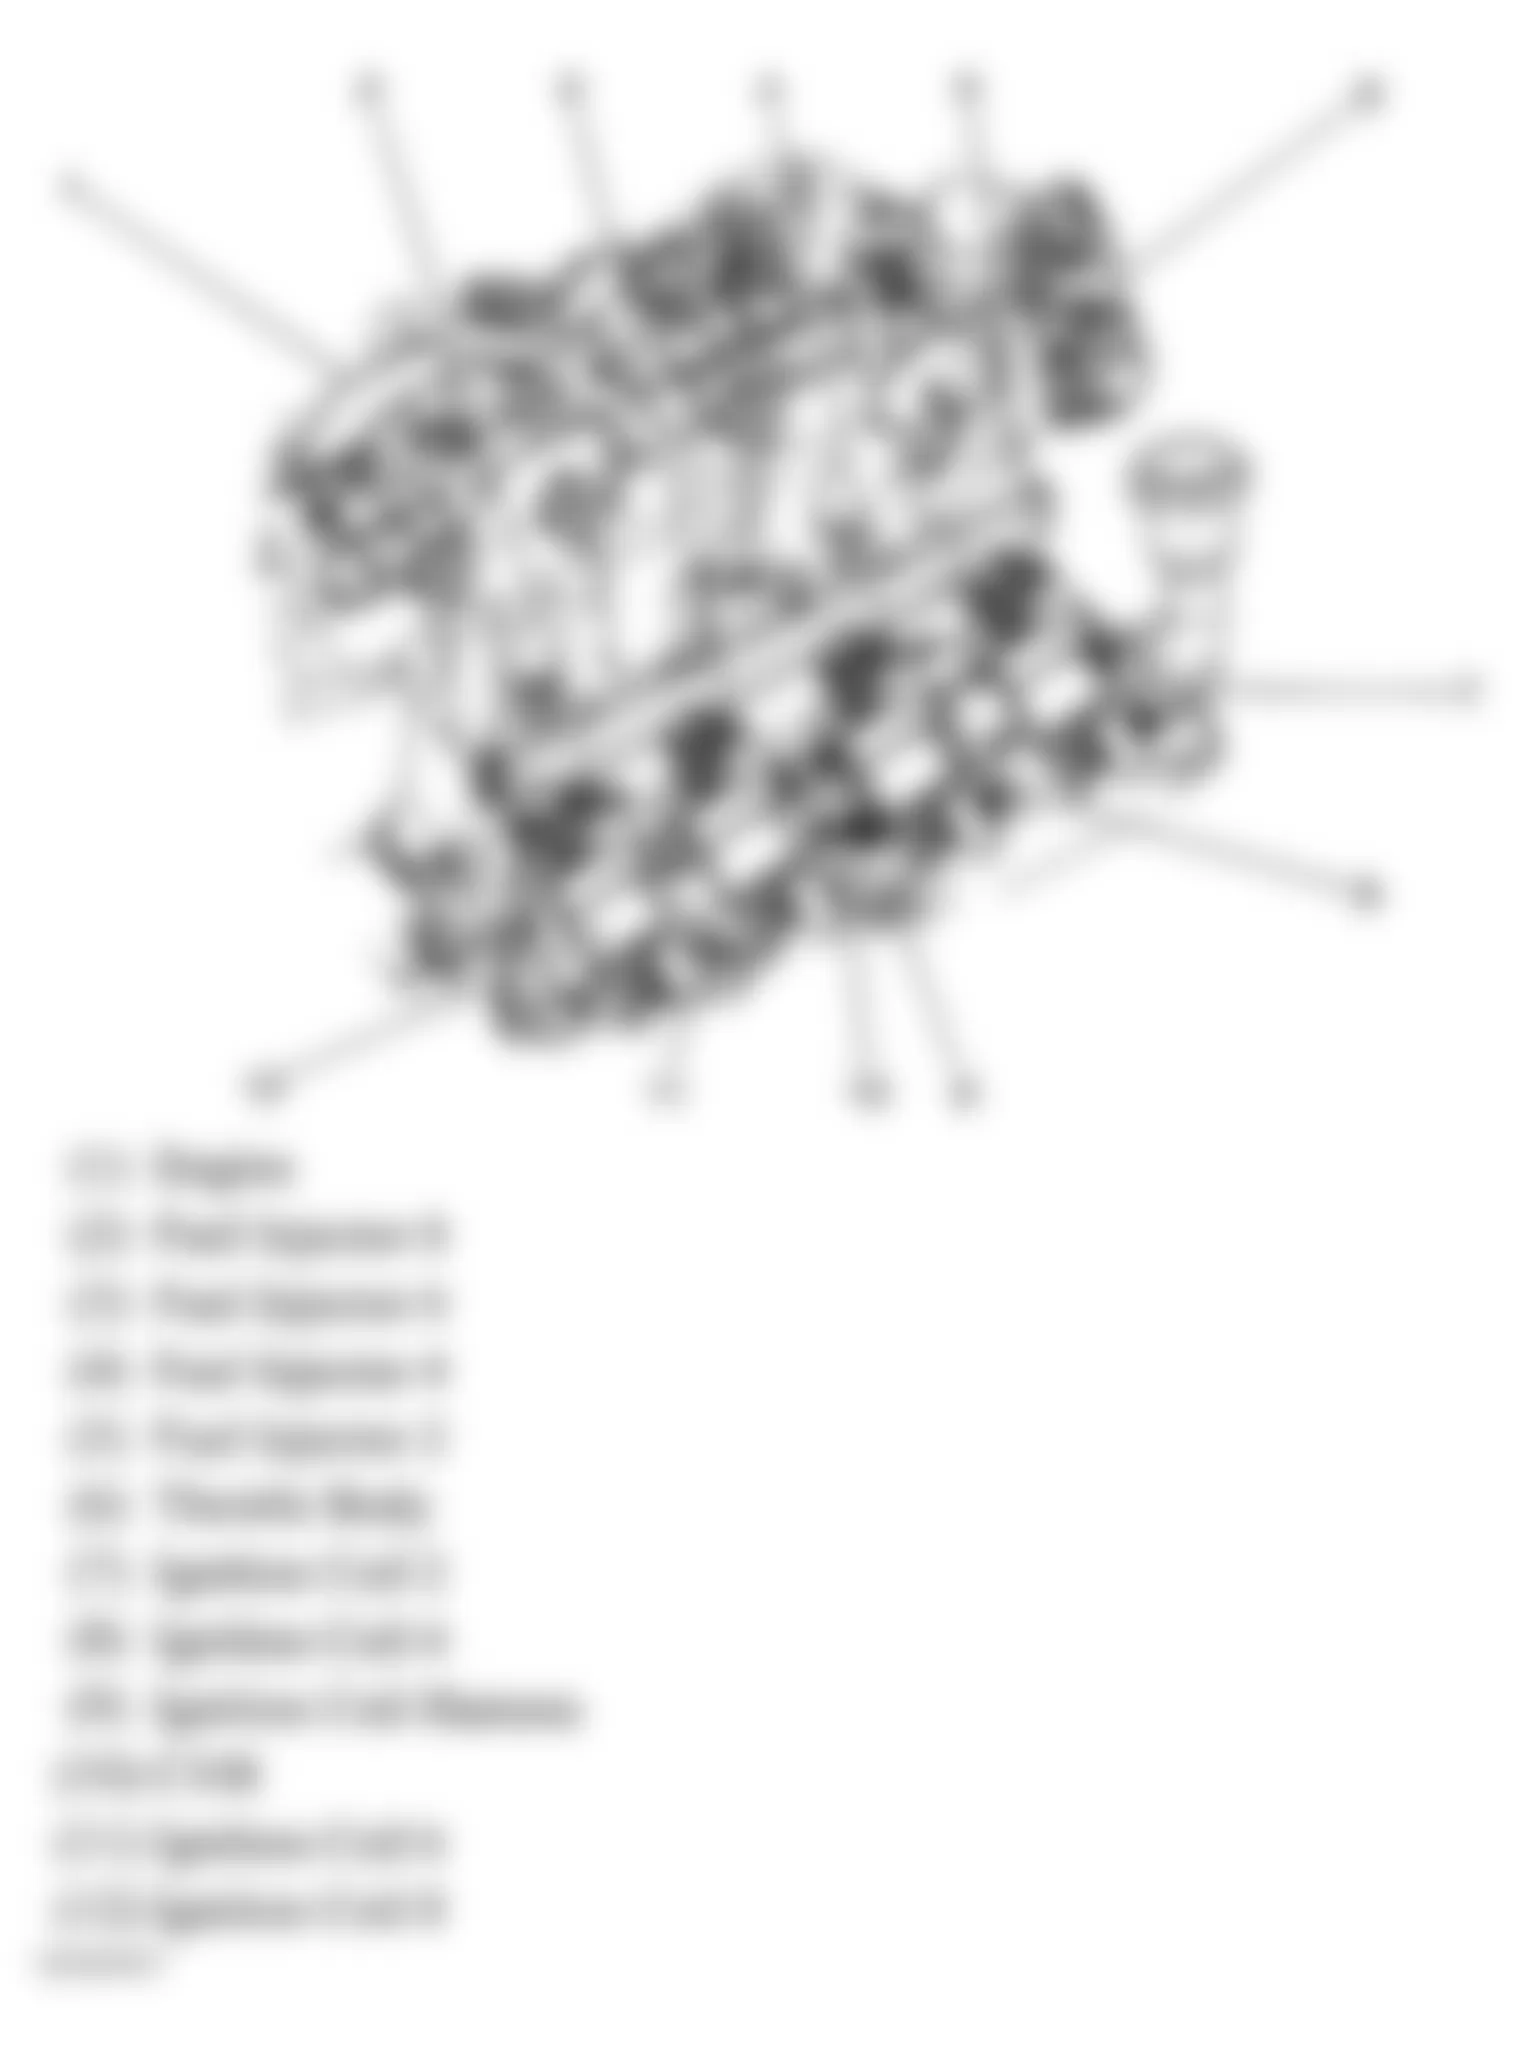 GMC Envoy XL 2005 - Component Locations -  Upper Right Side Of Engine (5.3L)